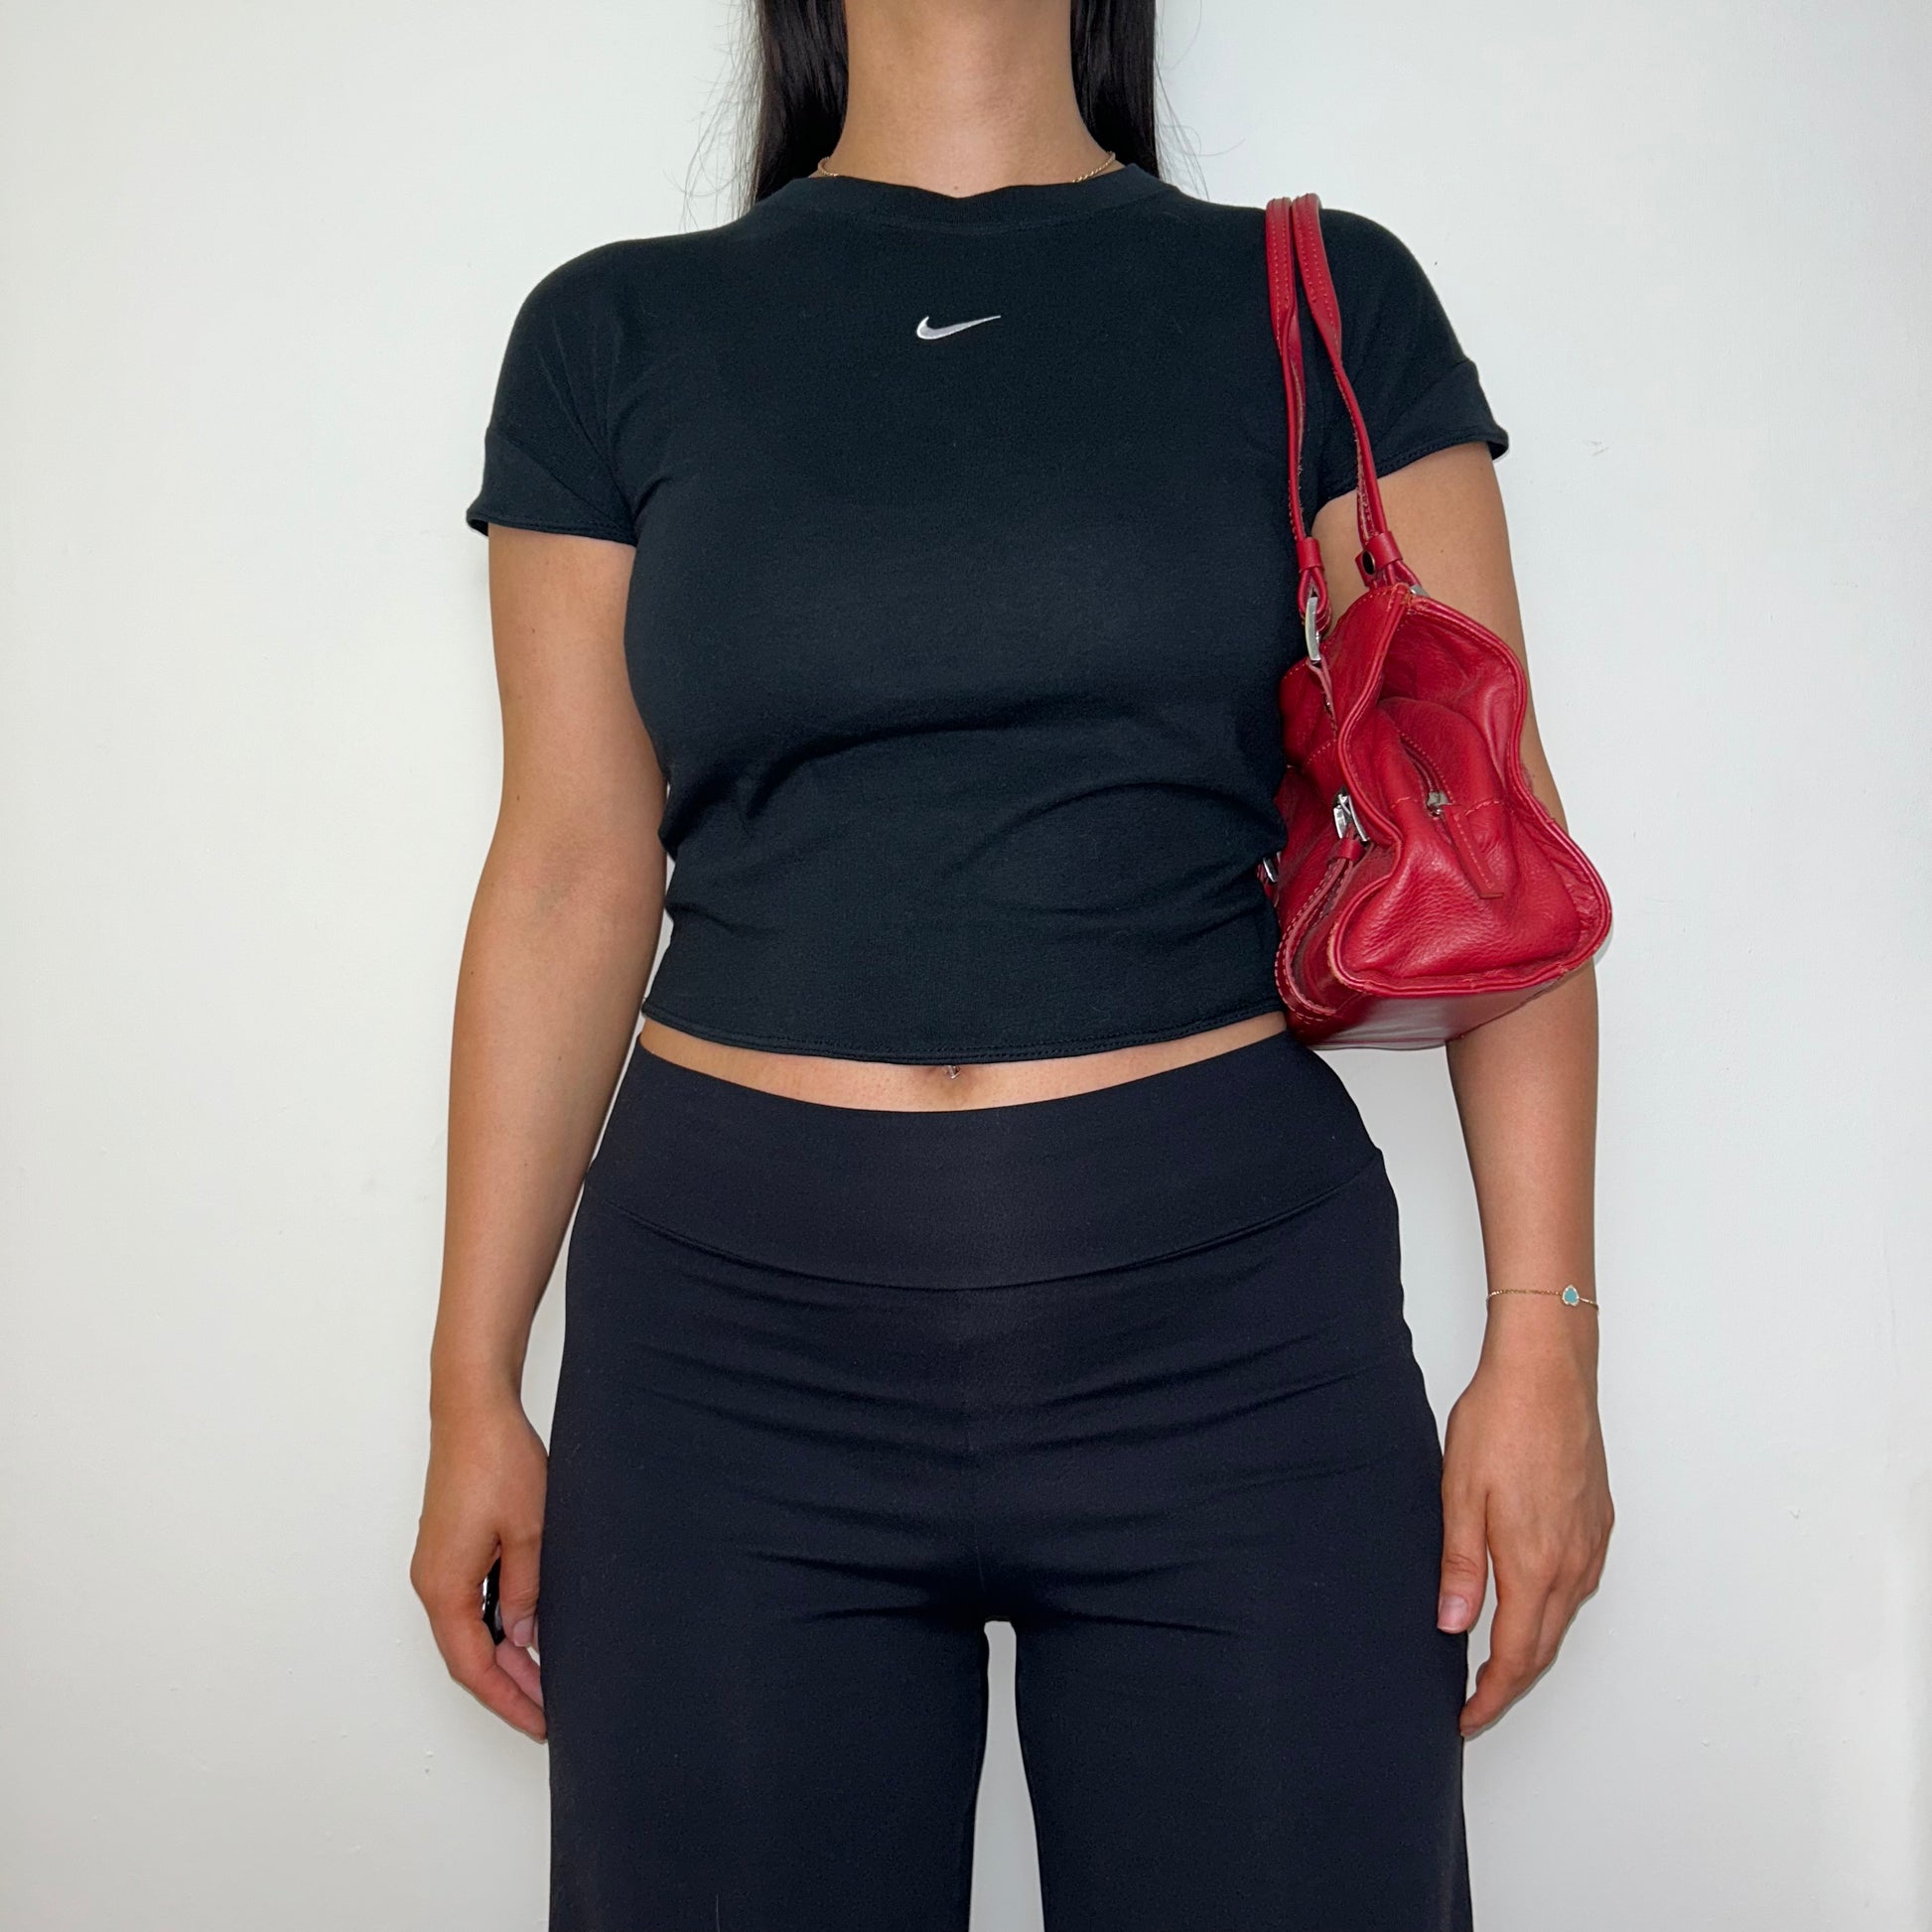 black short sleeve crop top with white nike swoosh logo shown on a model wearing black trousers and a red shoulder bag